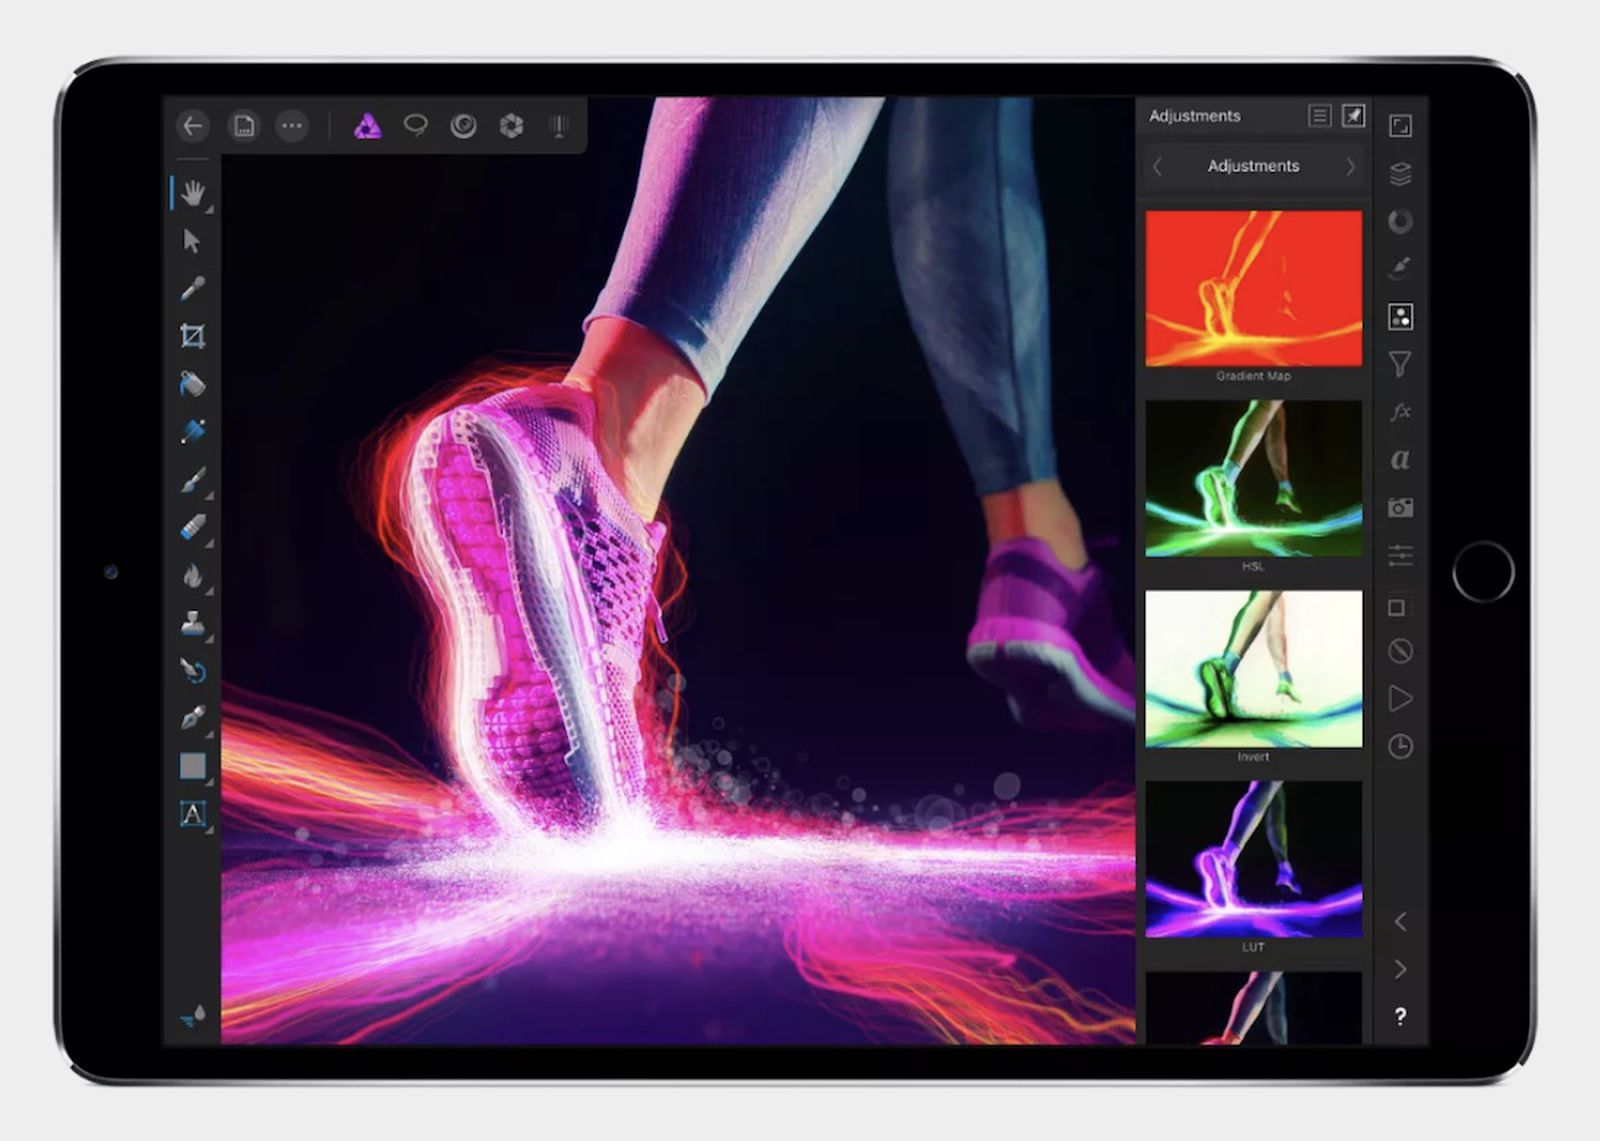 Affinity Photo for apple download free